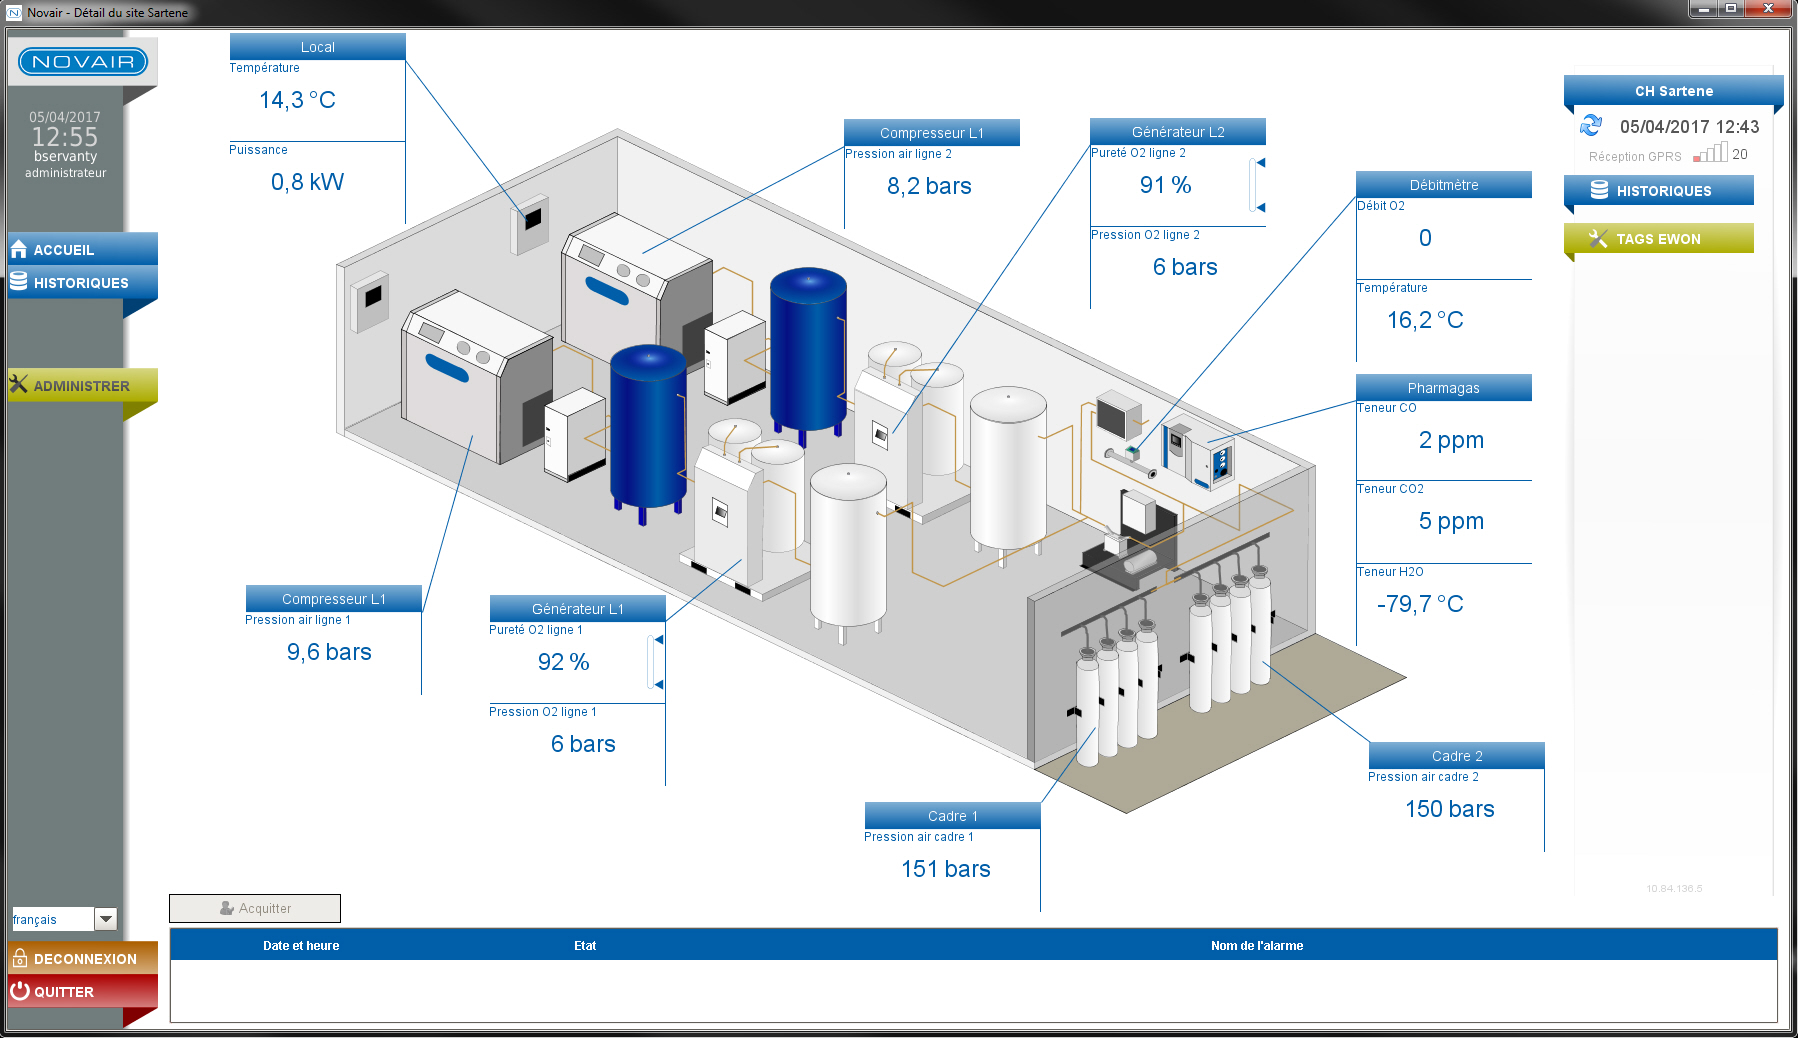 Visio access Remote control of medical gas installations